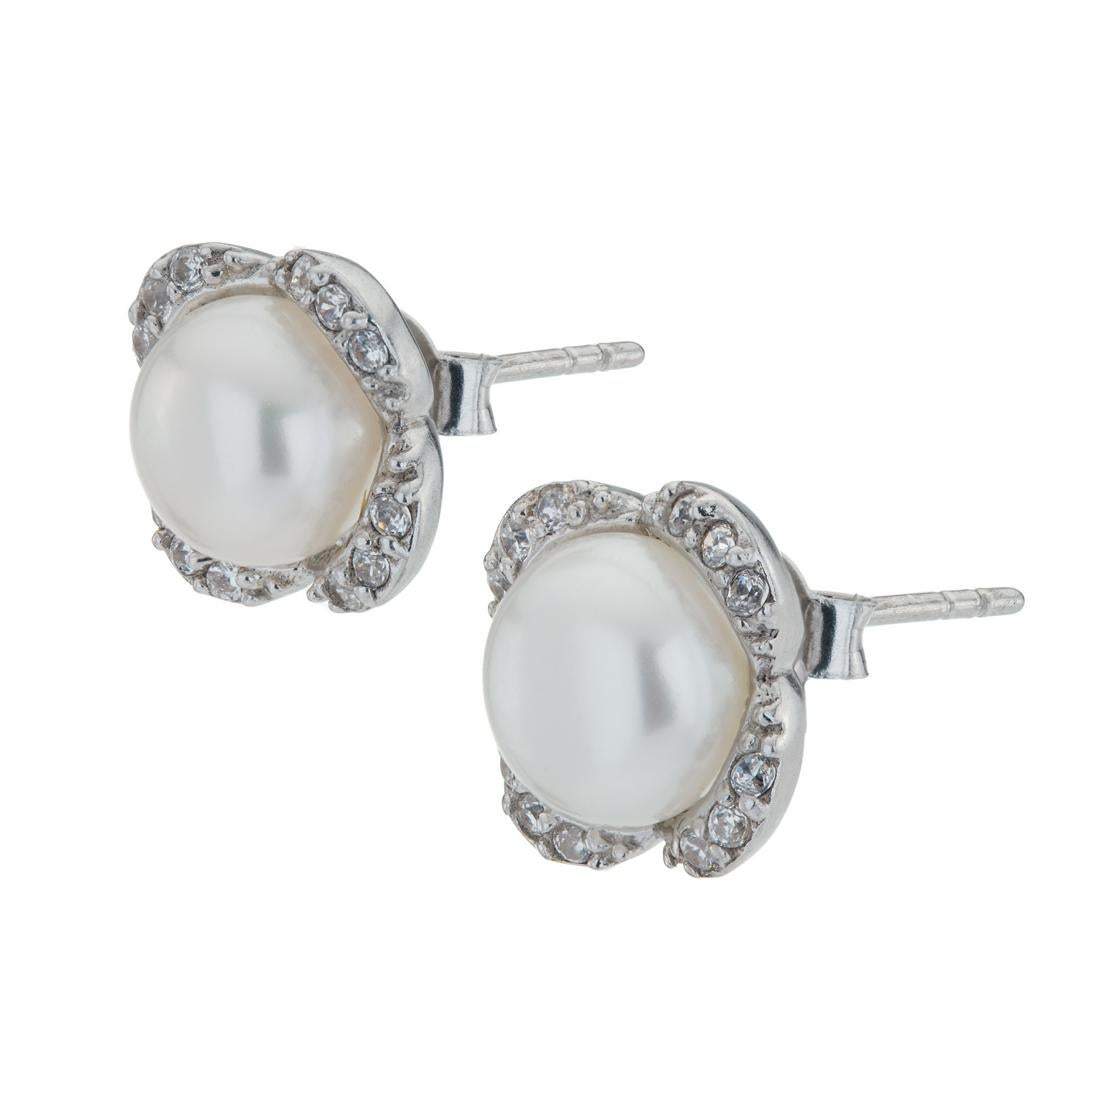 Sterling Silver Pearls Scalloped Stud Earrings - Shop Thrifty Treasures